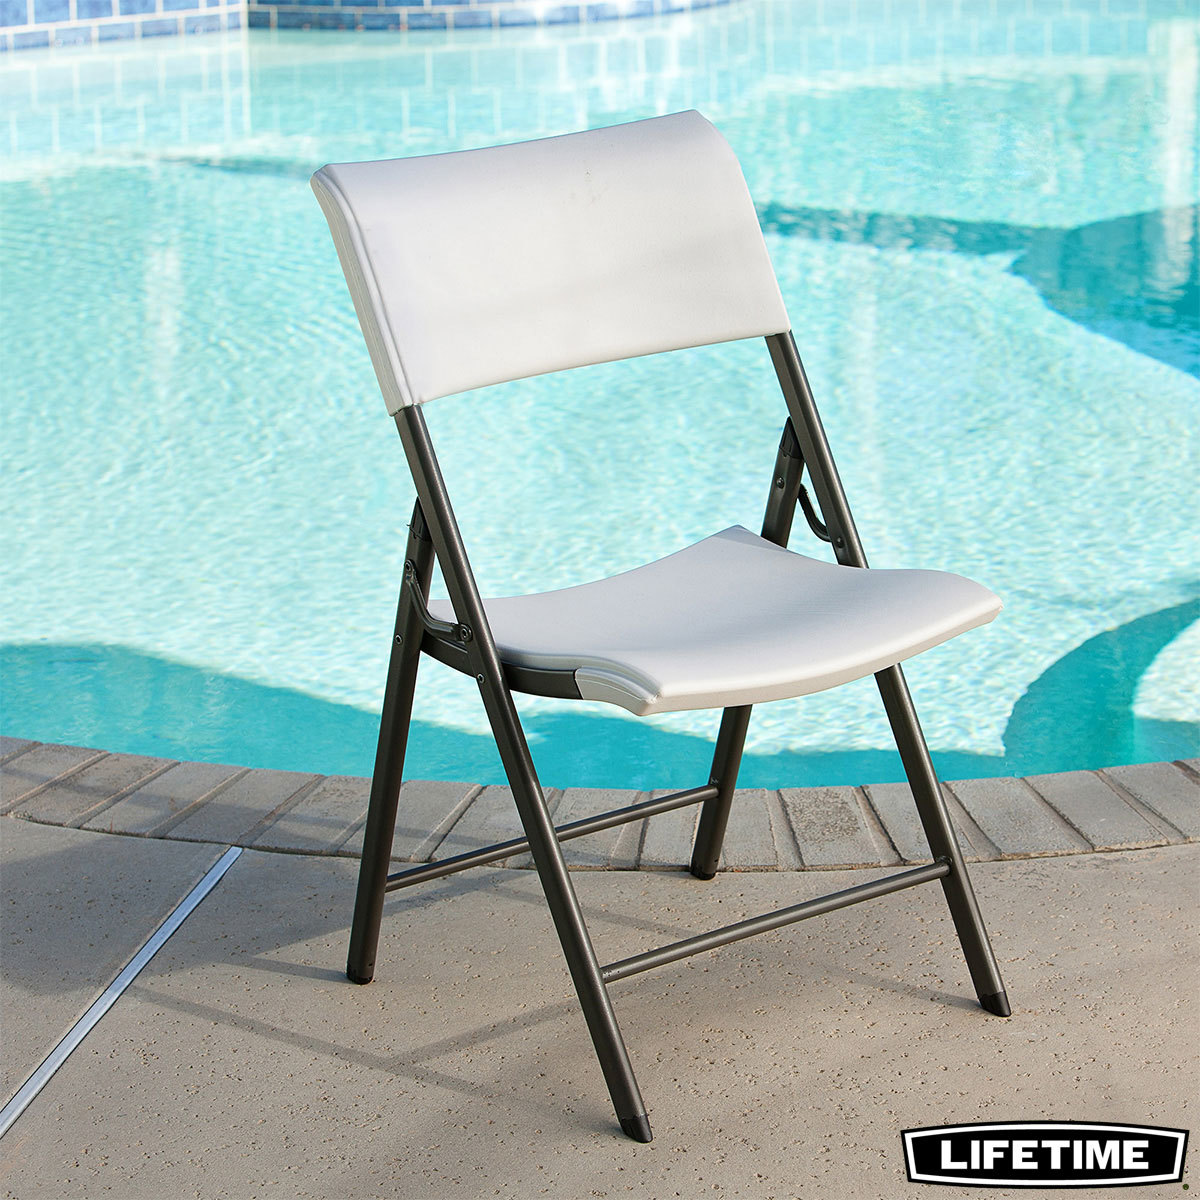 Lifetime Folding Chair Light Commercial Pack Of 4 Costco Uk